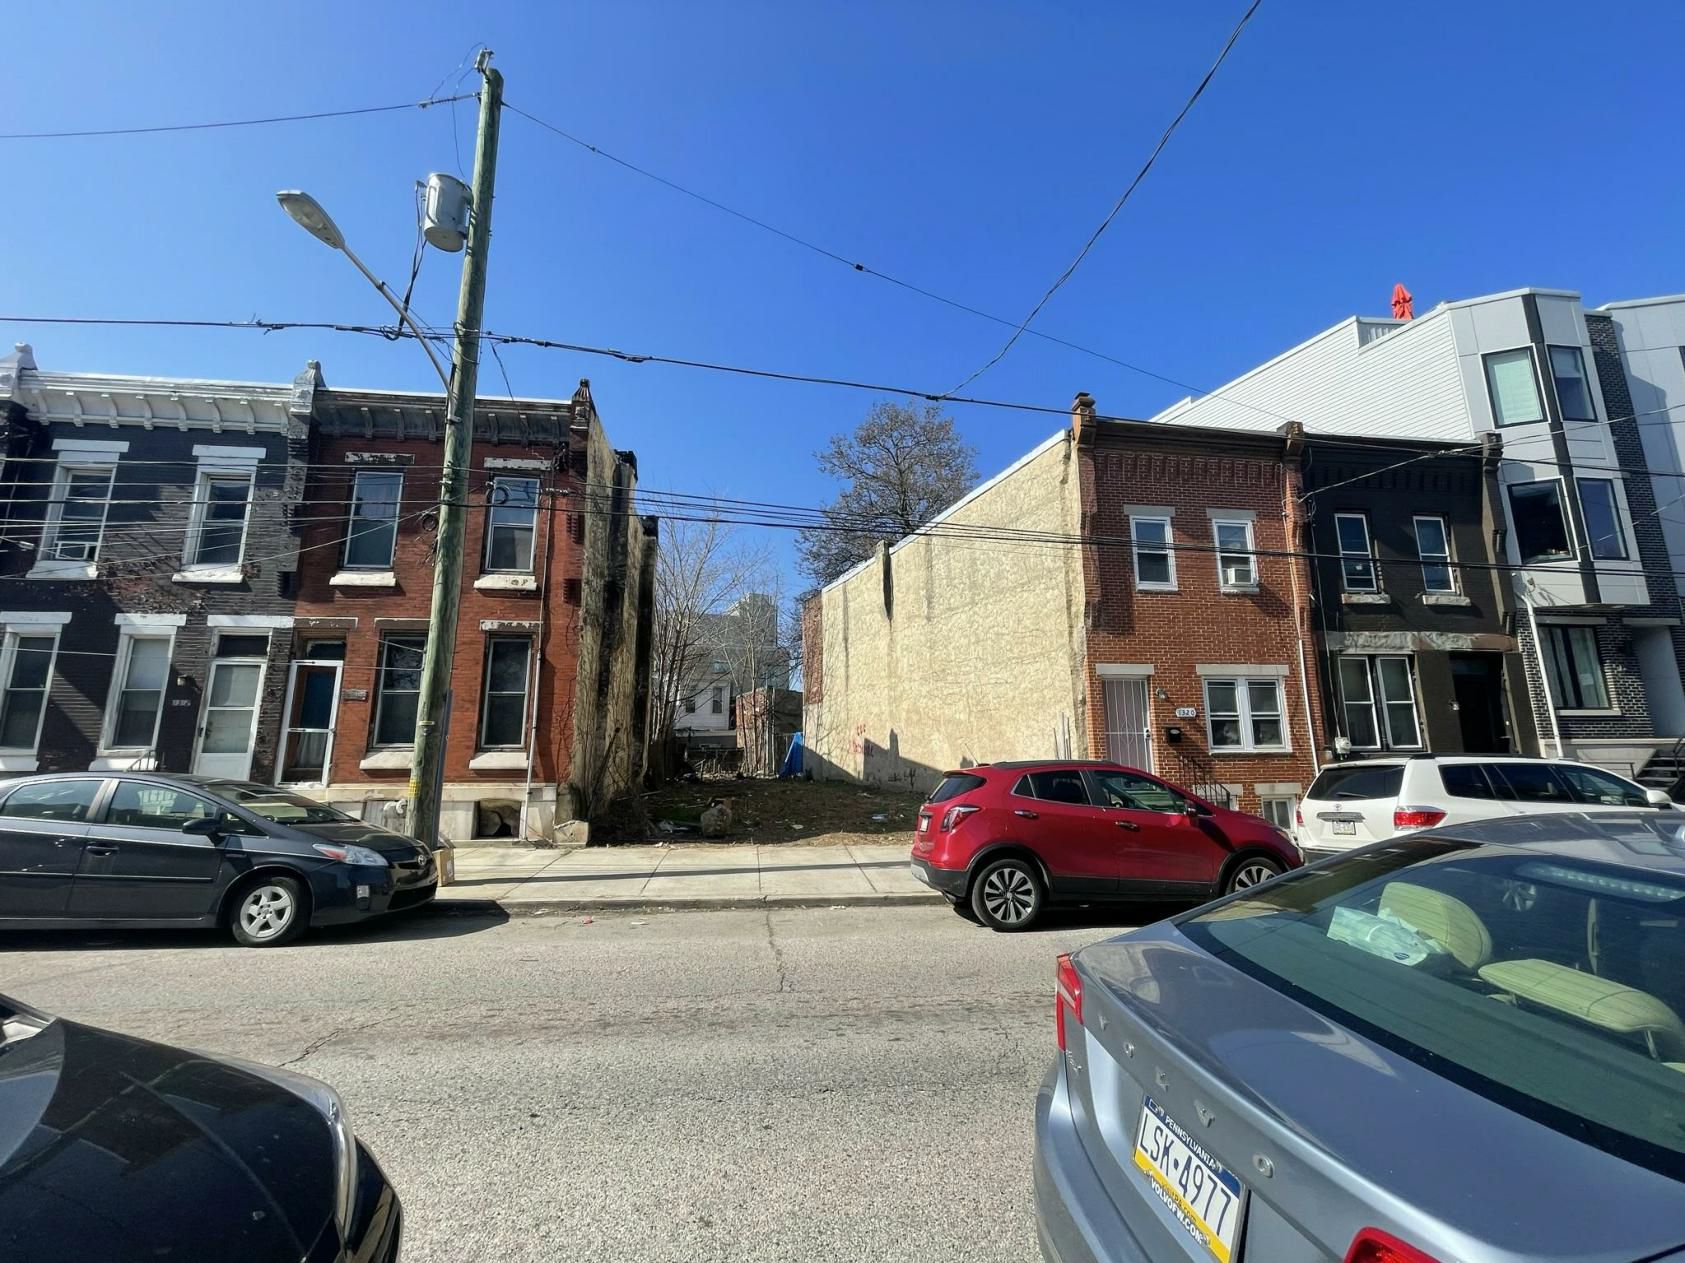 1316 North 27th Street. Site conditions prior to redevelopment. Looking west. Credit: Moto Designshop via the City of Philadelphia